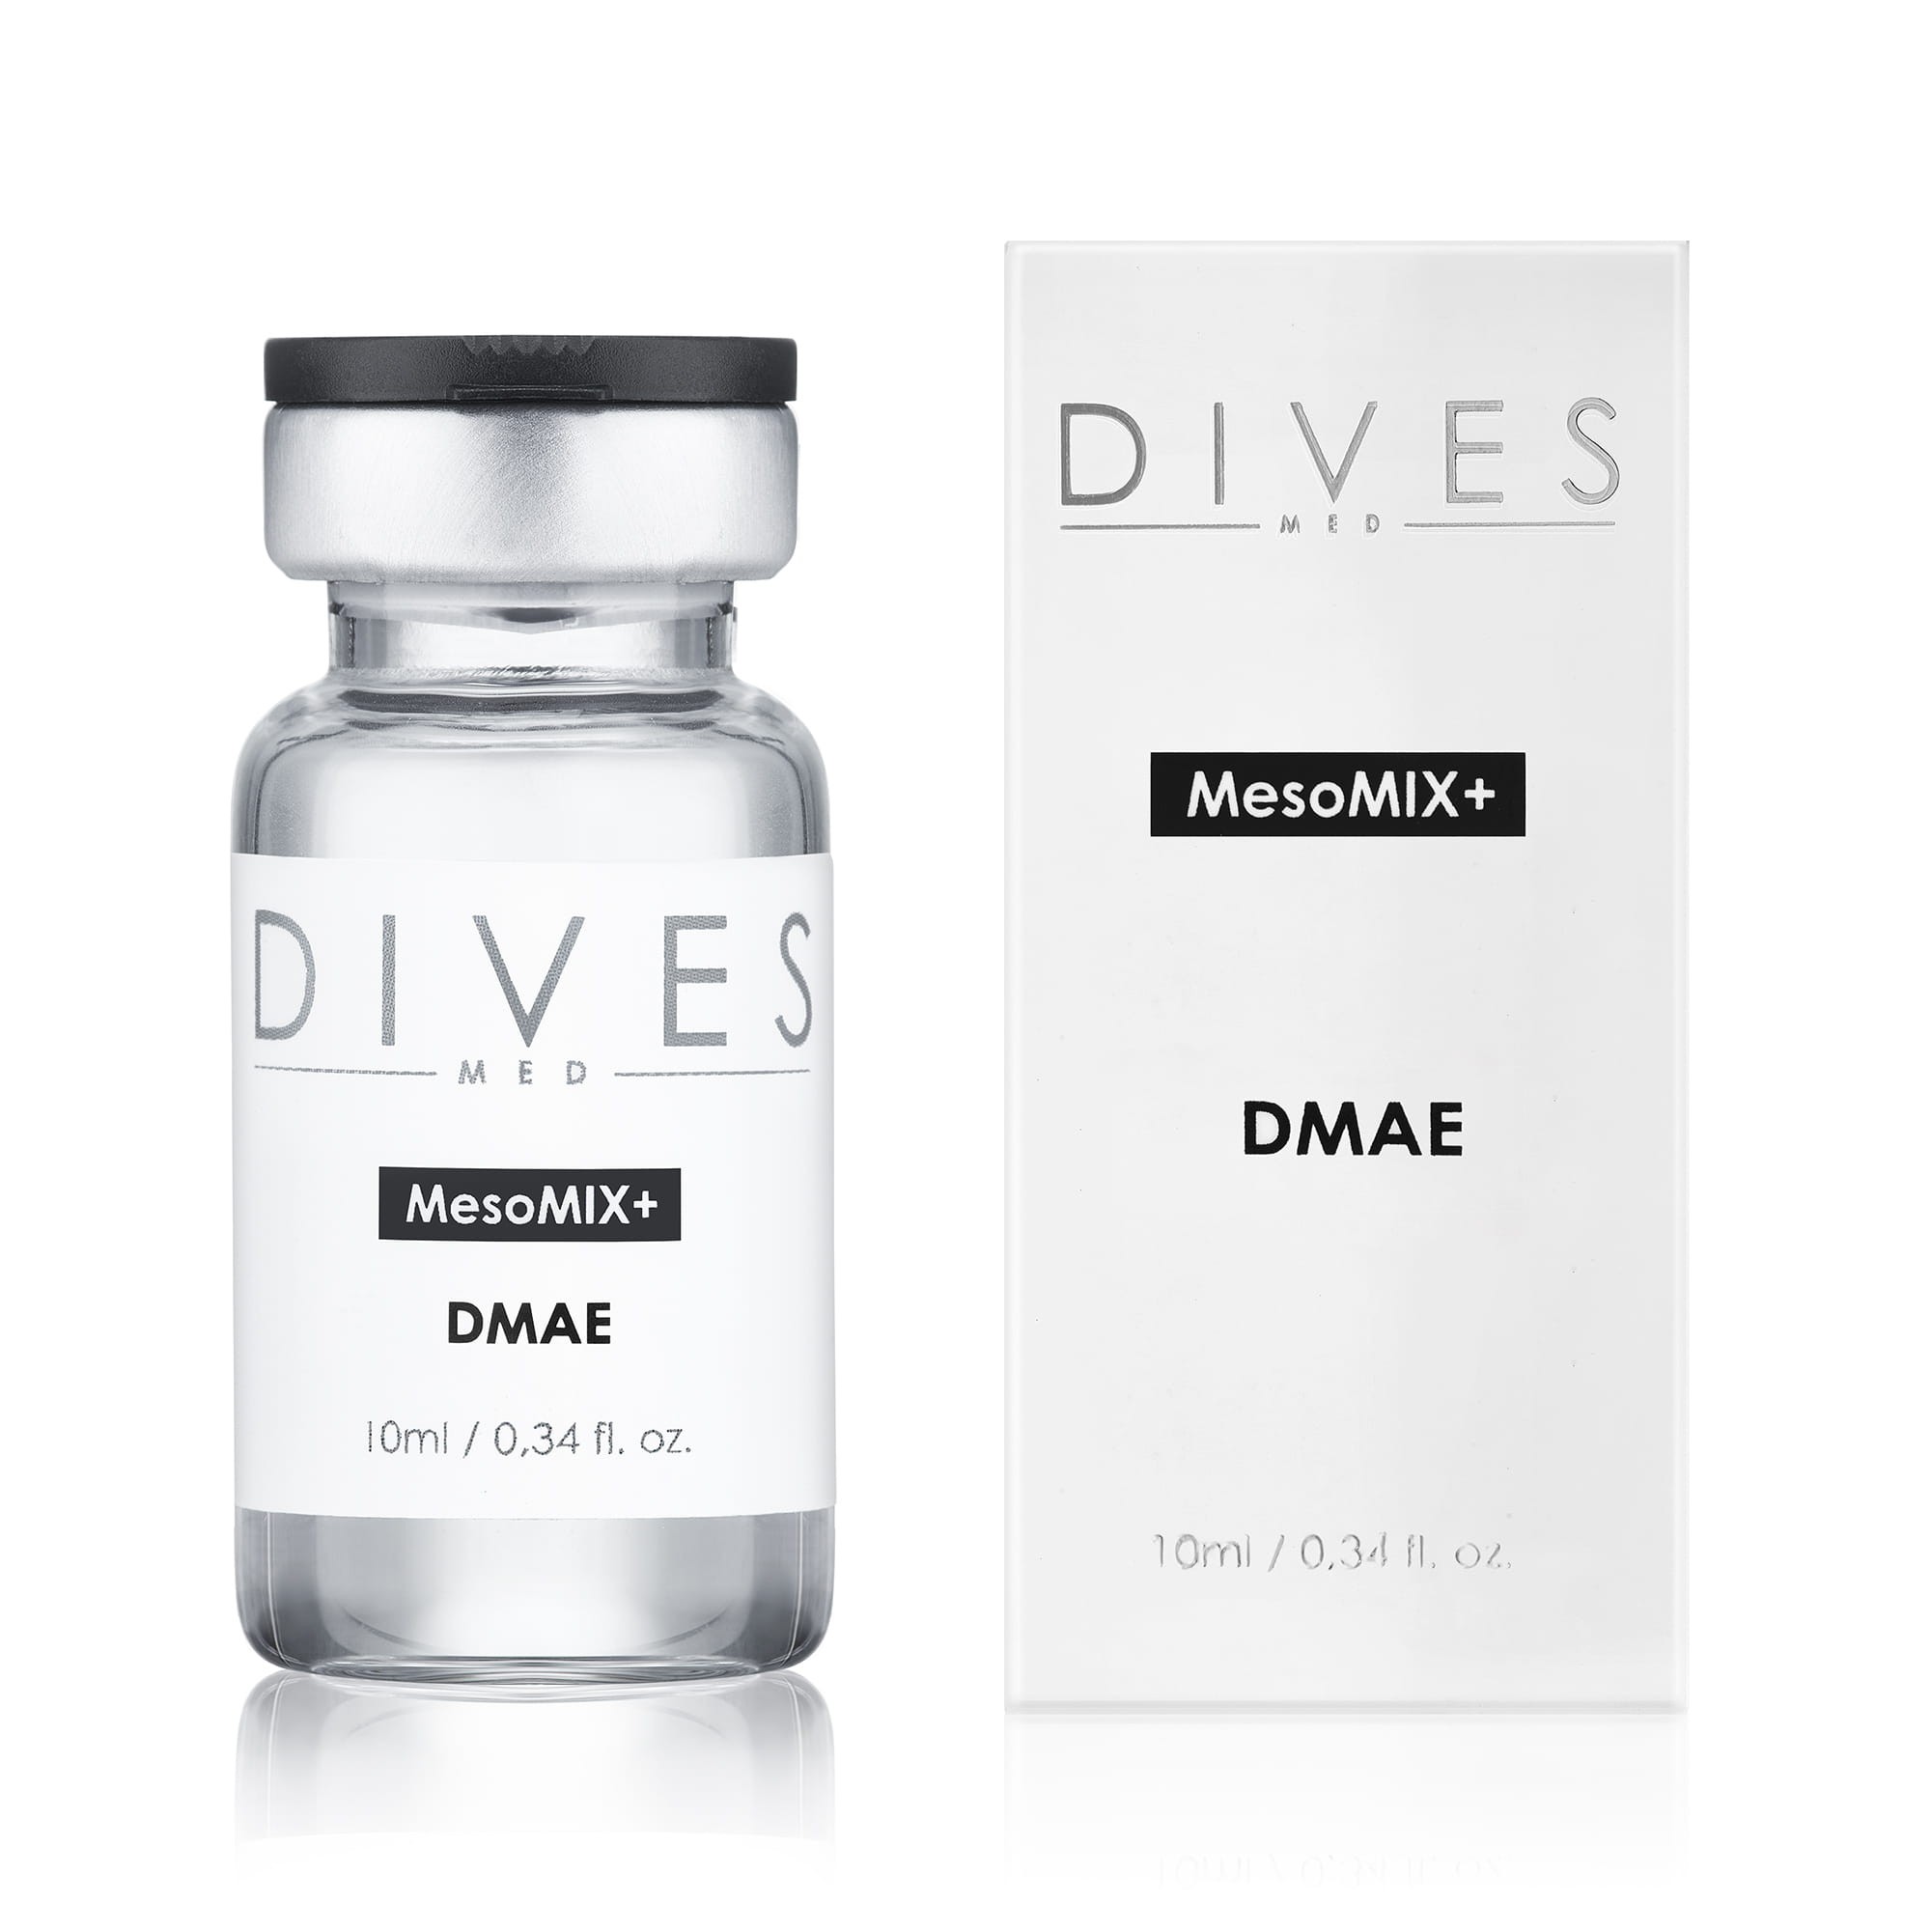 DMAE Highly concentrated (Instant tightening effect) 10 ml